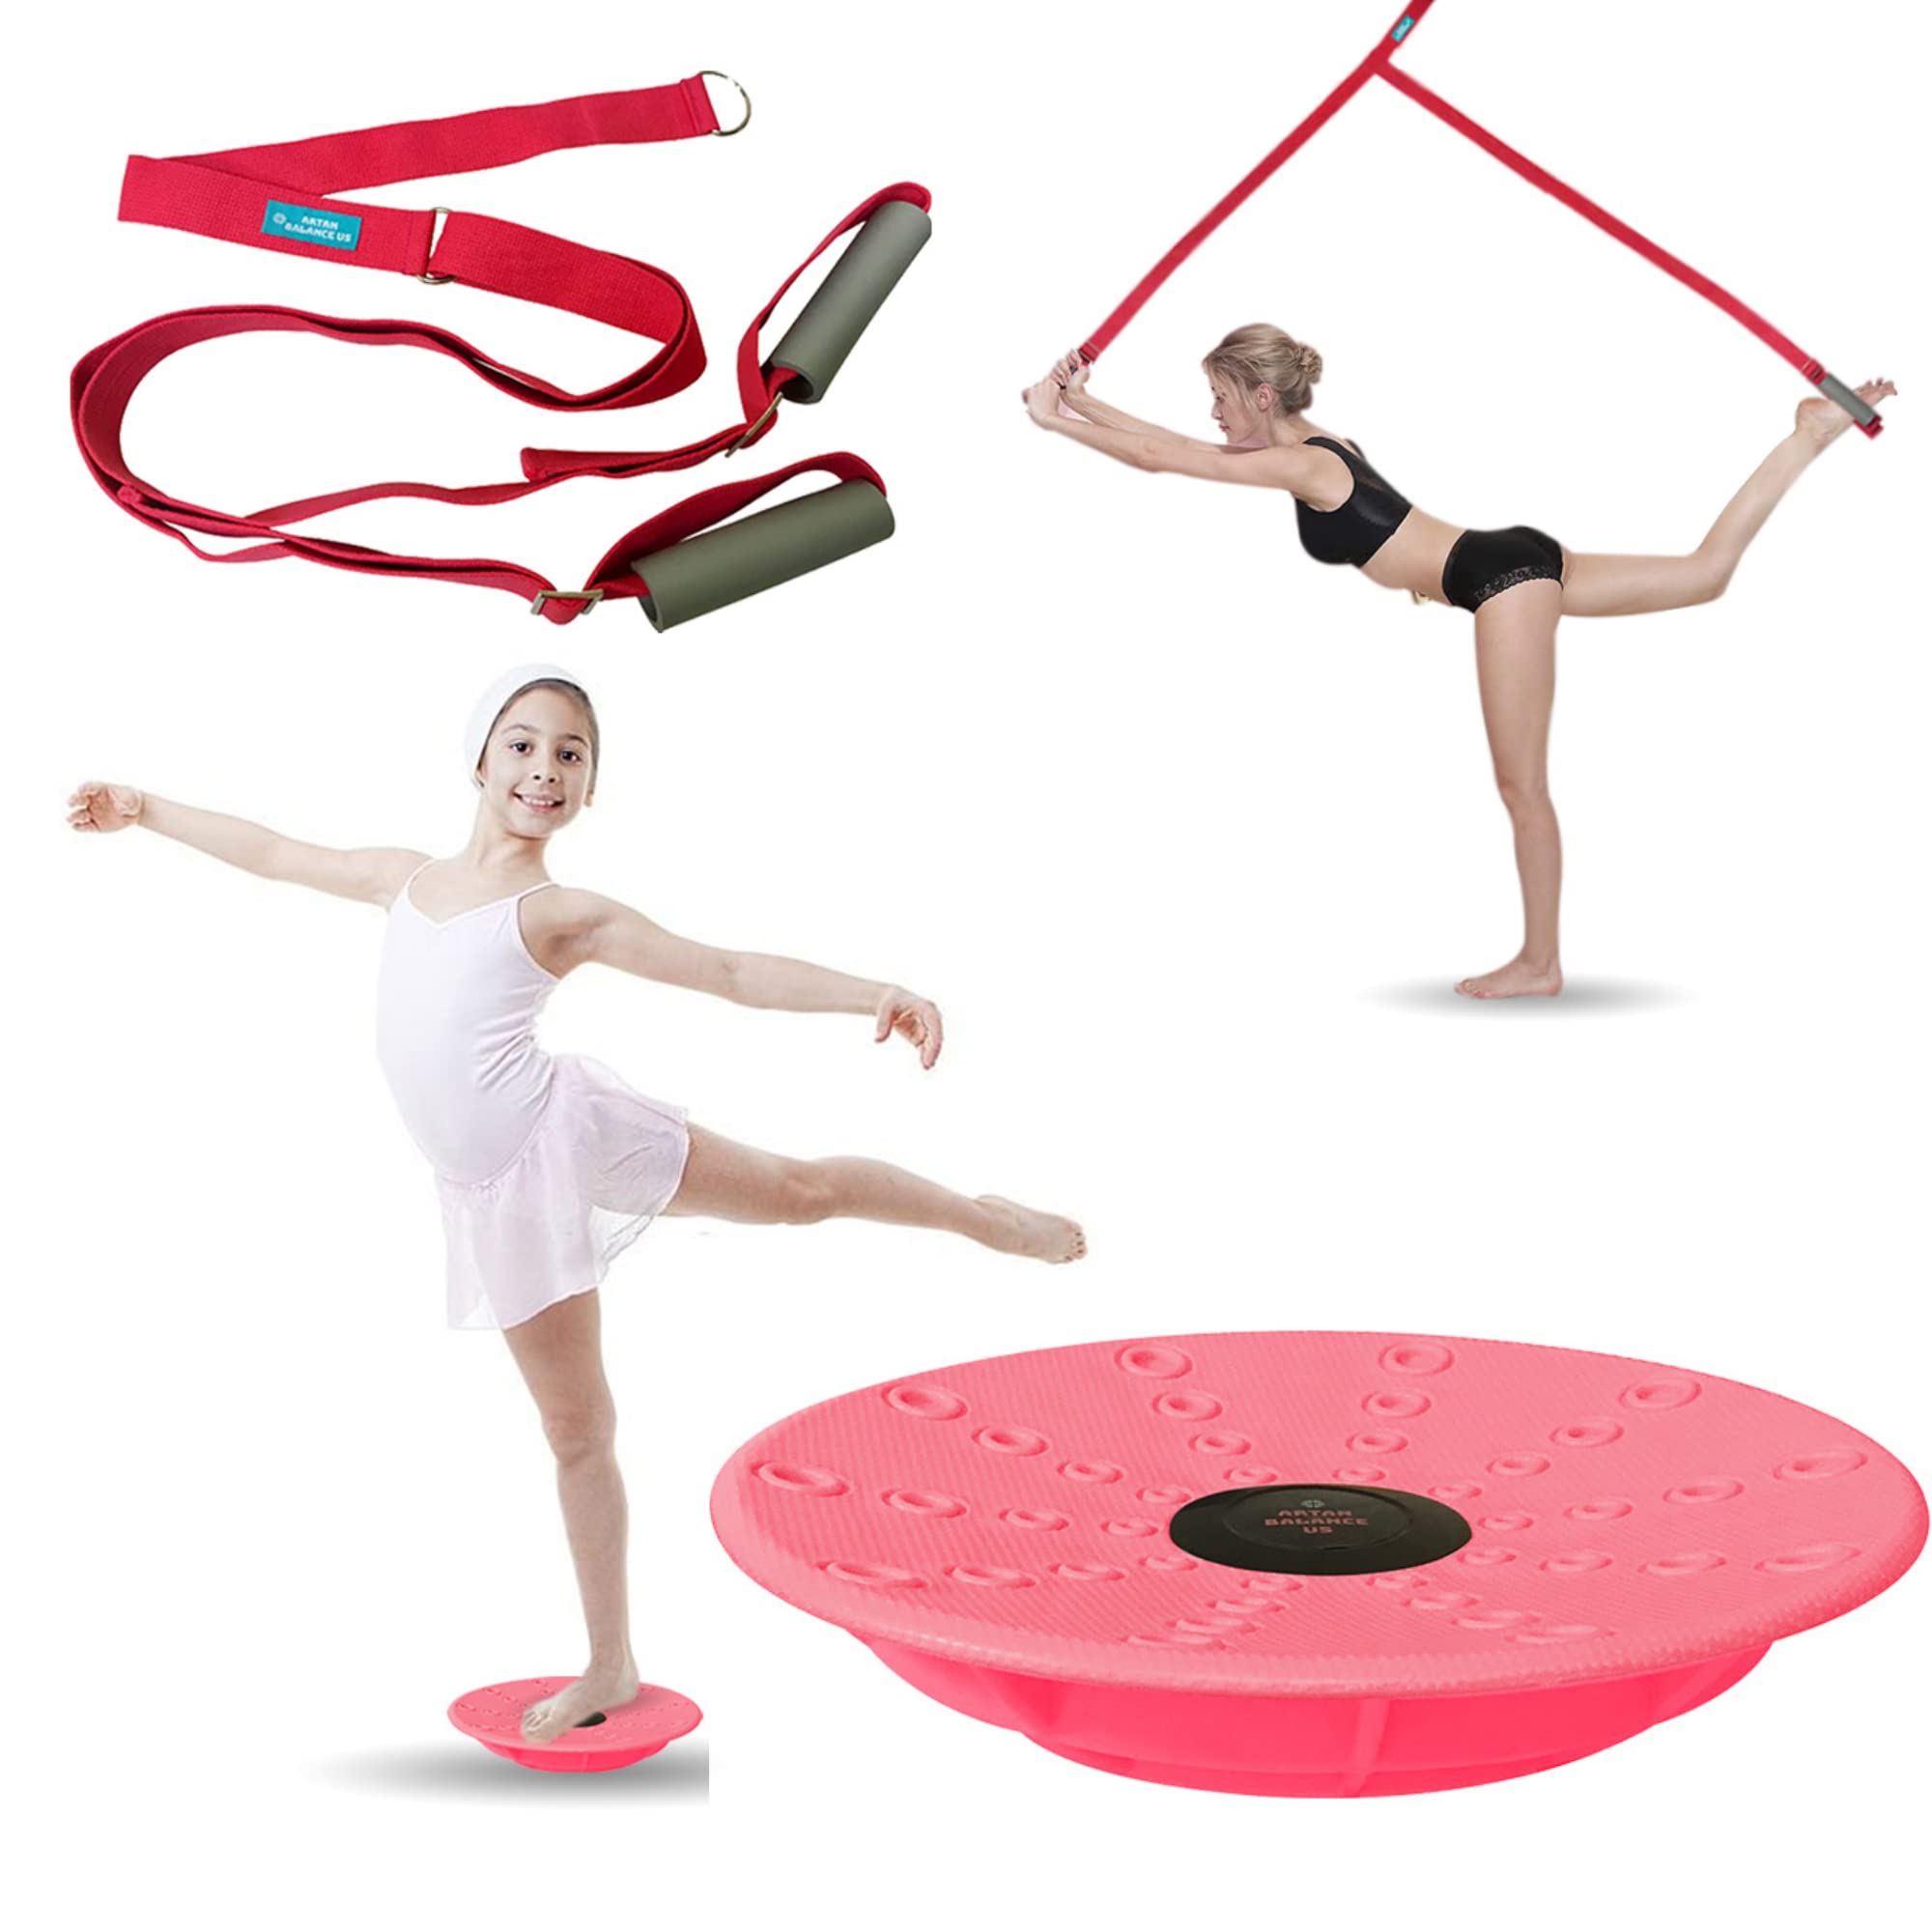 Cheer, Dance and Gymnastics Equipment and Apparel